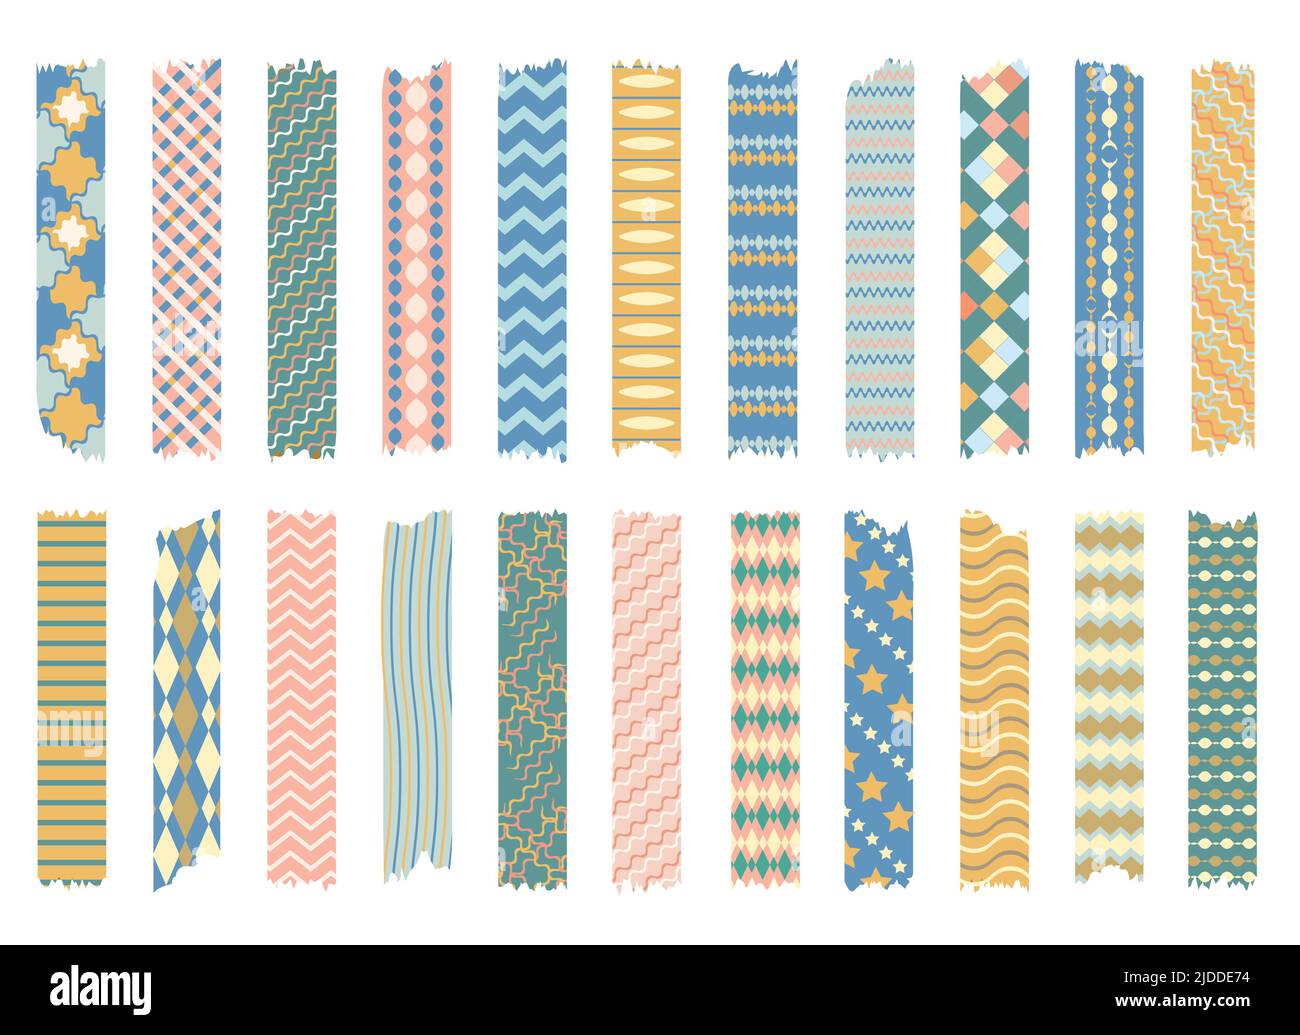 264 Printable Washi Tape Images, Stock Photos, 3D objects